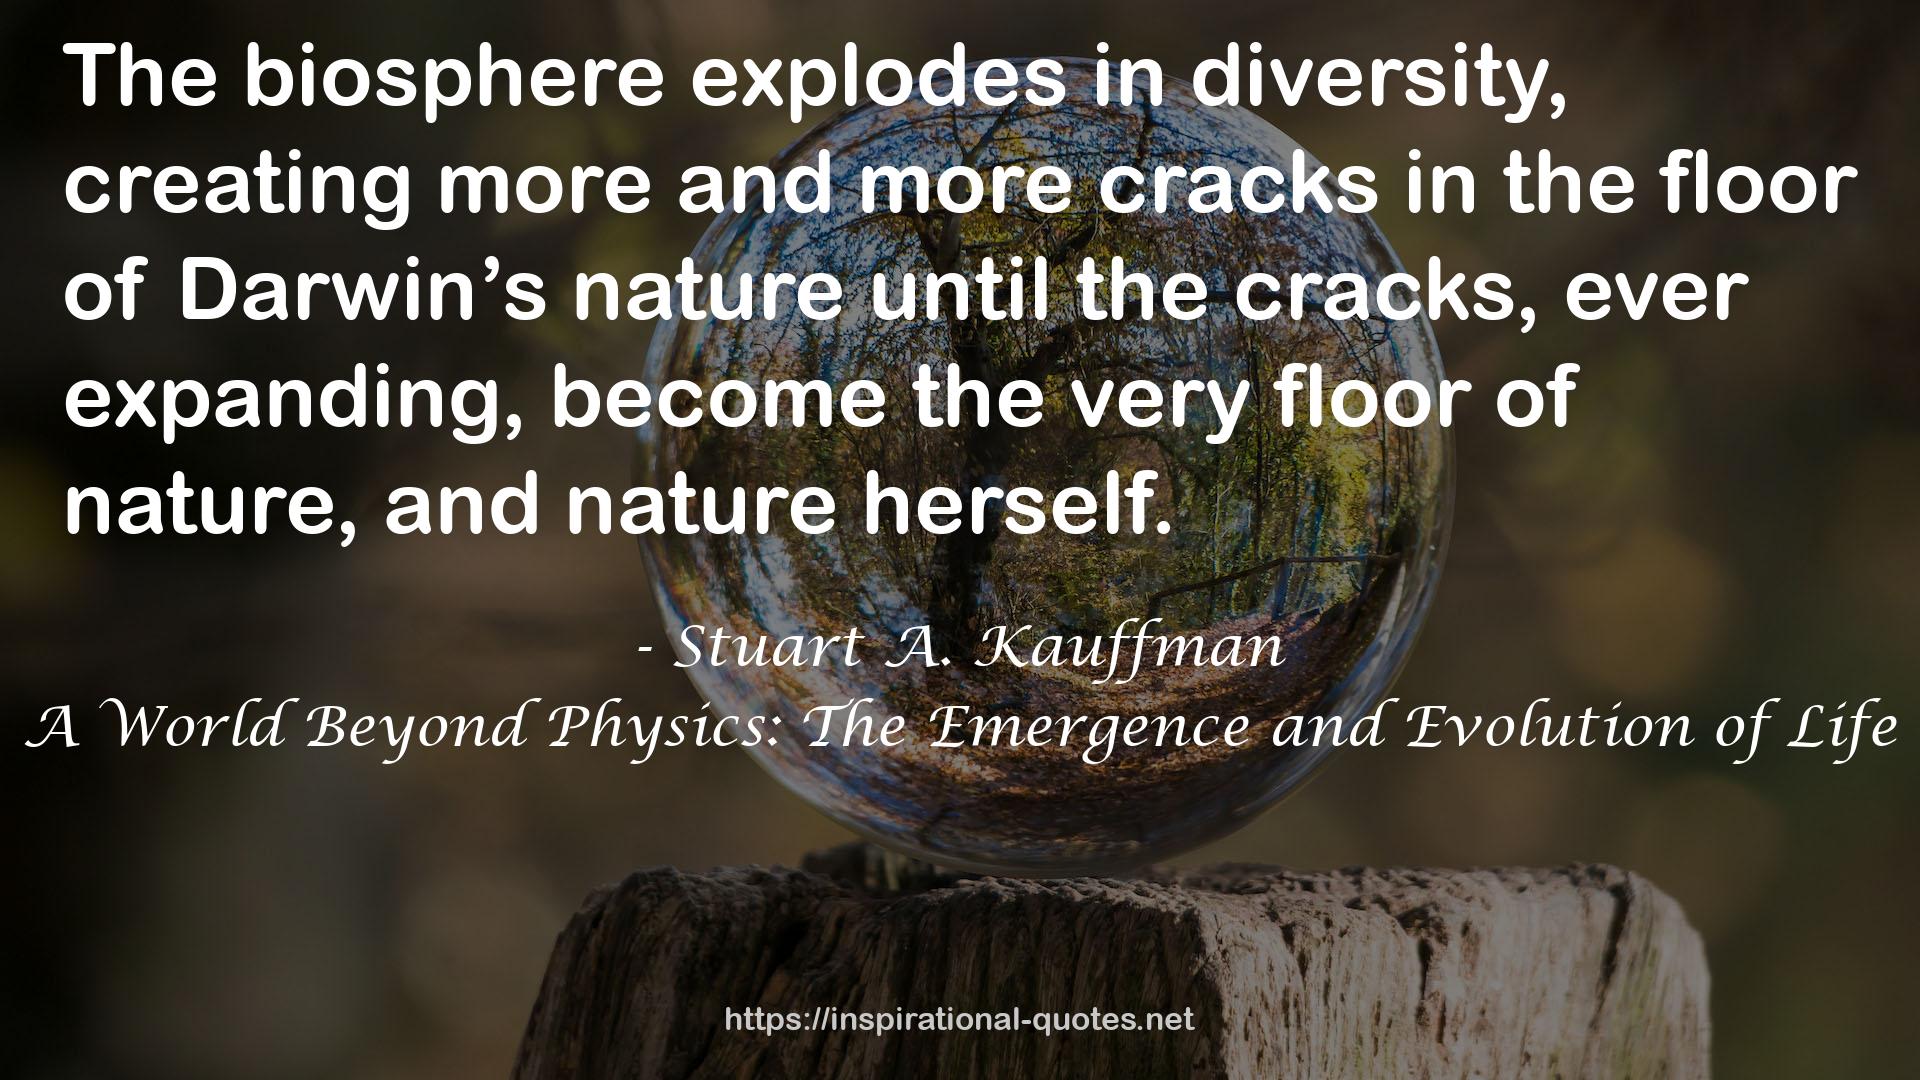 A World Beyond Physics: The Emergence and Evolution of Life QUOTES